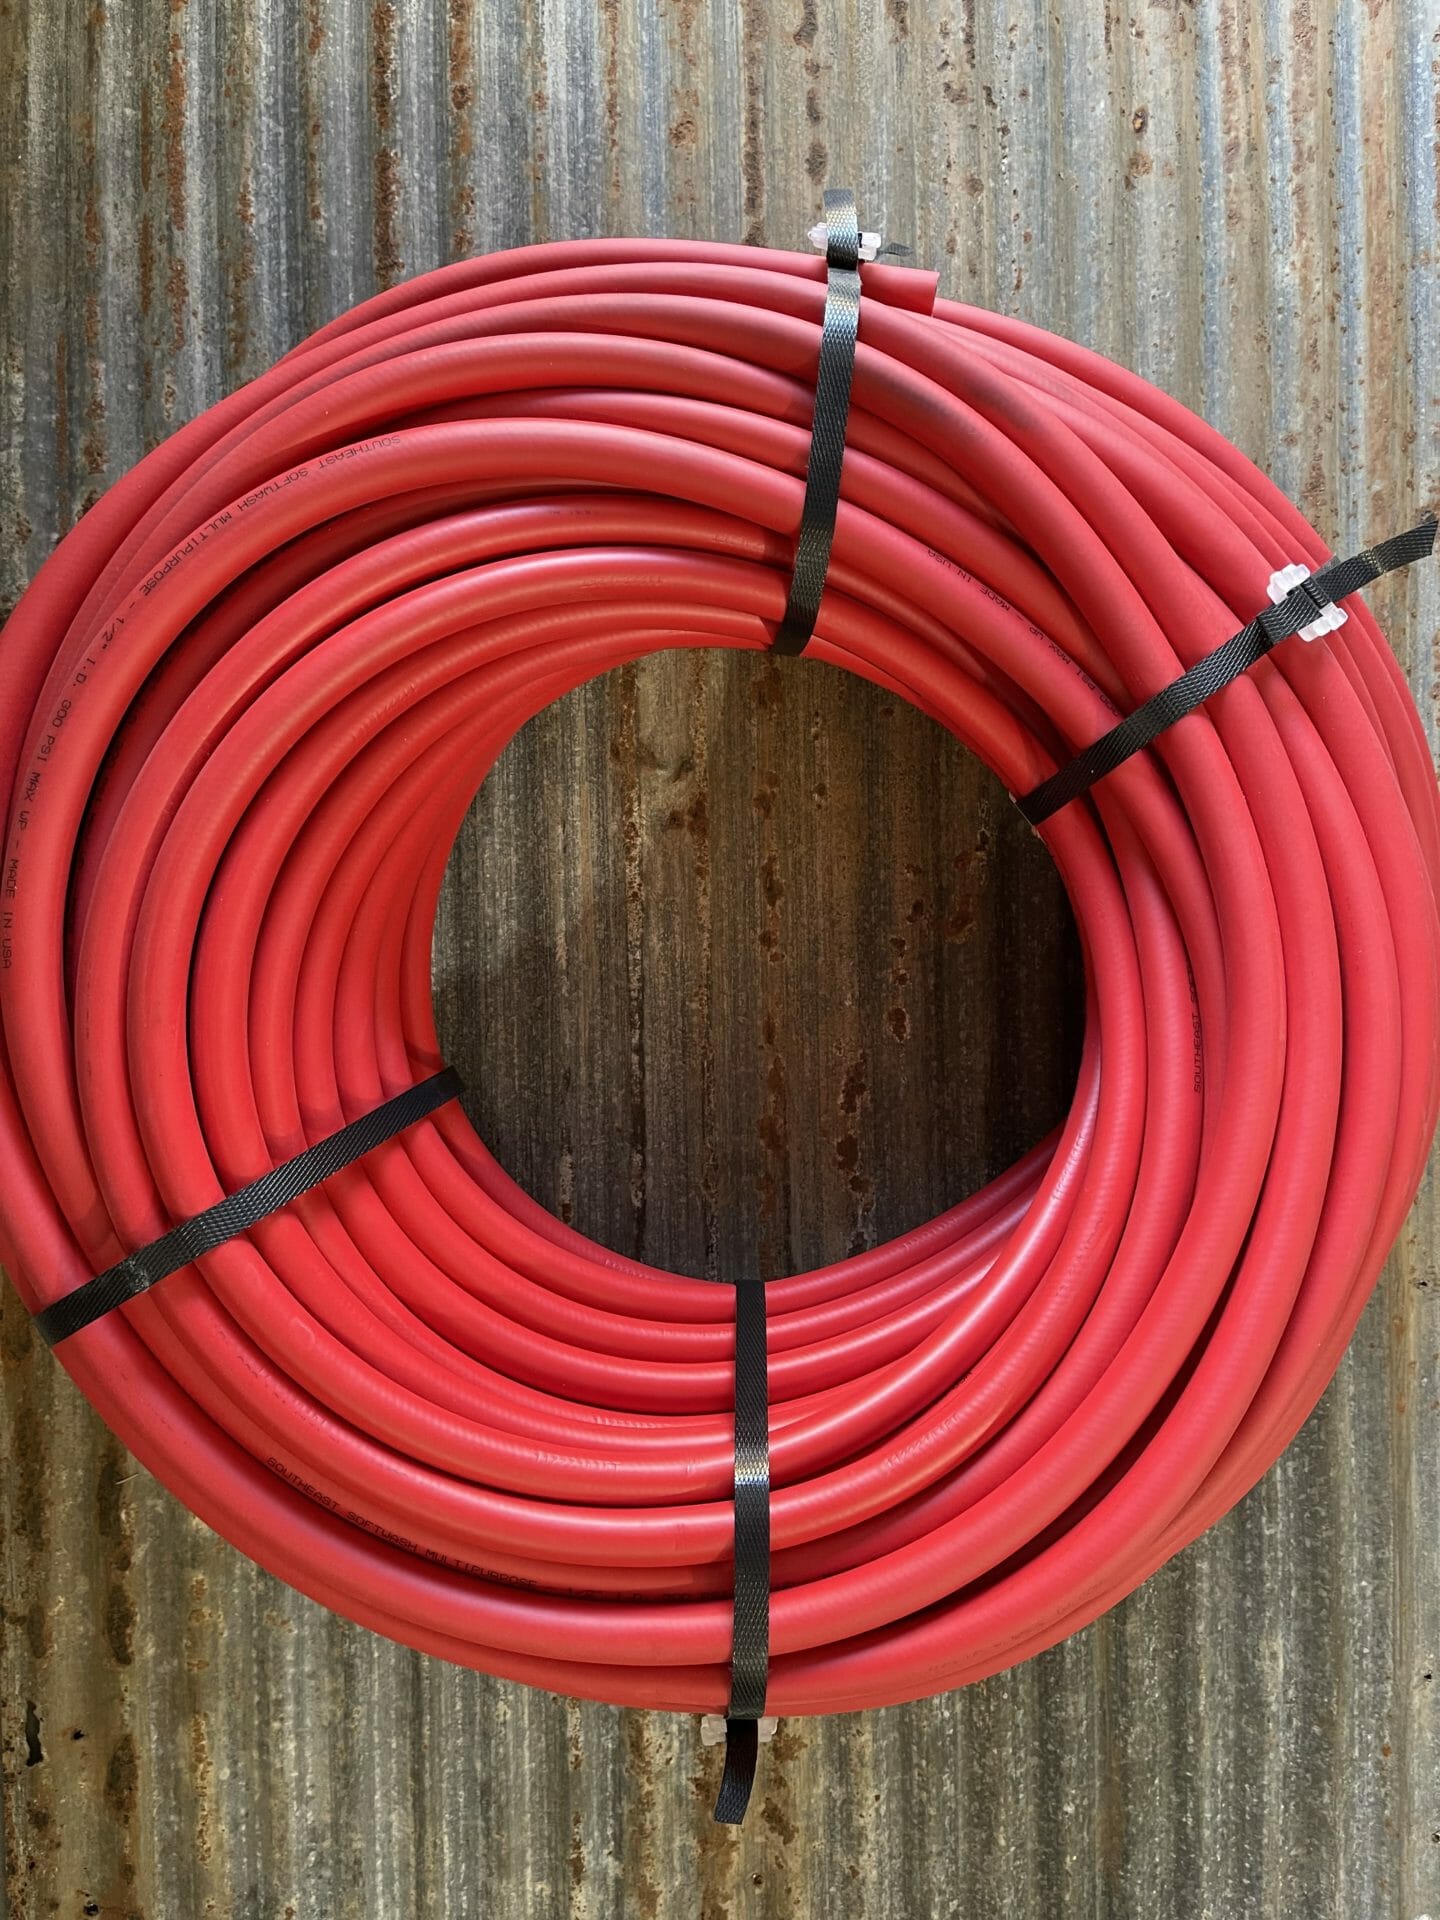 200 ft of 1/2 Soft wash Hose - Roof King Products